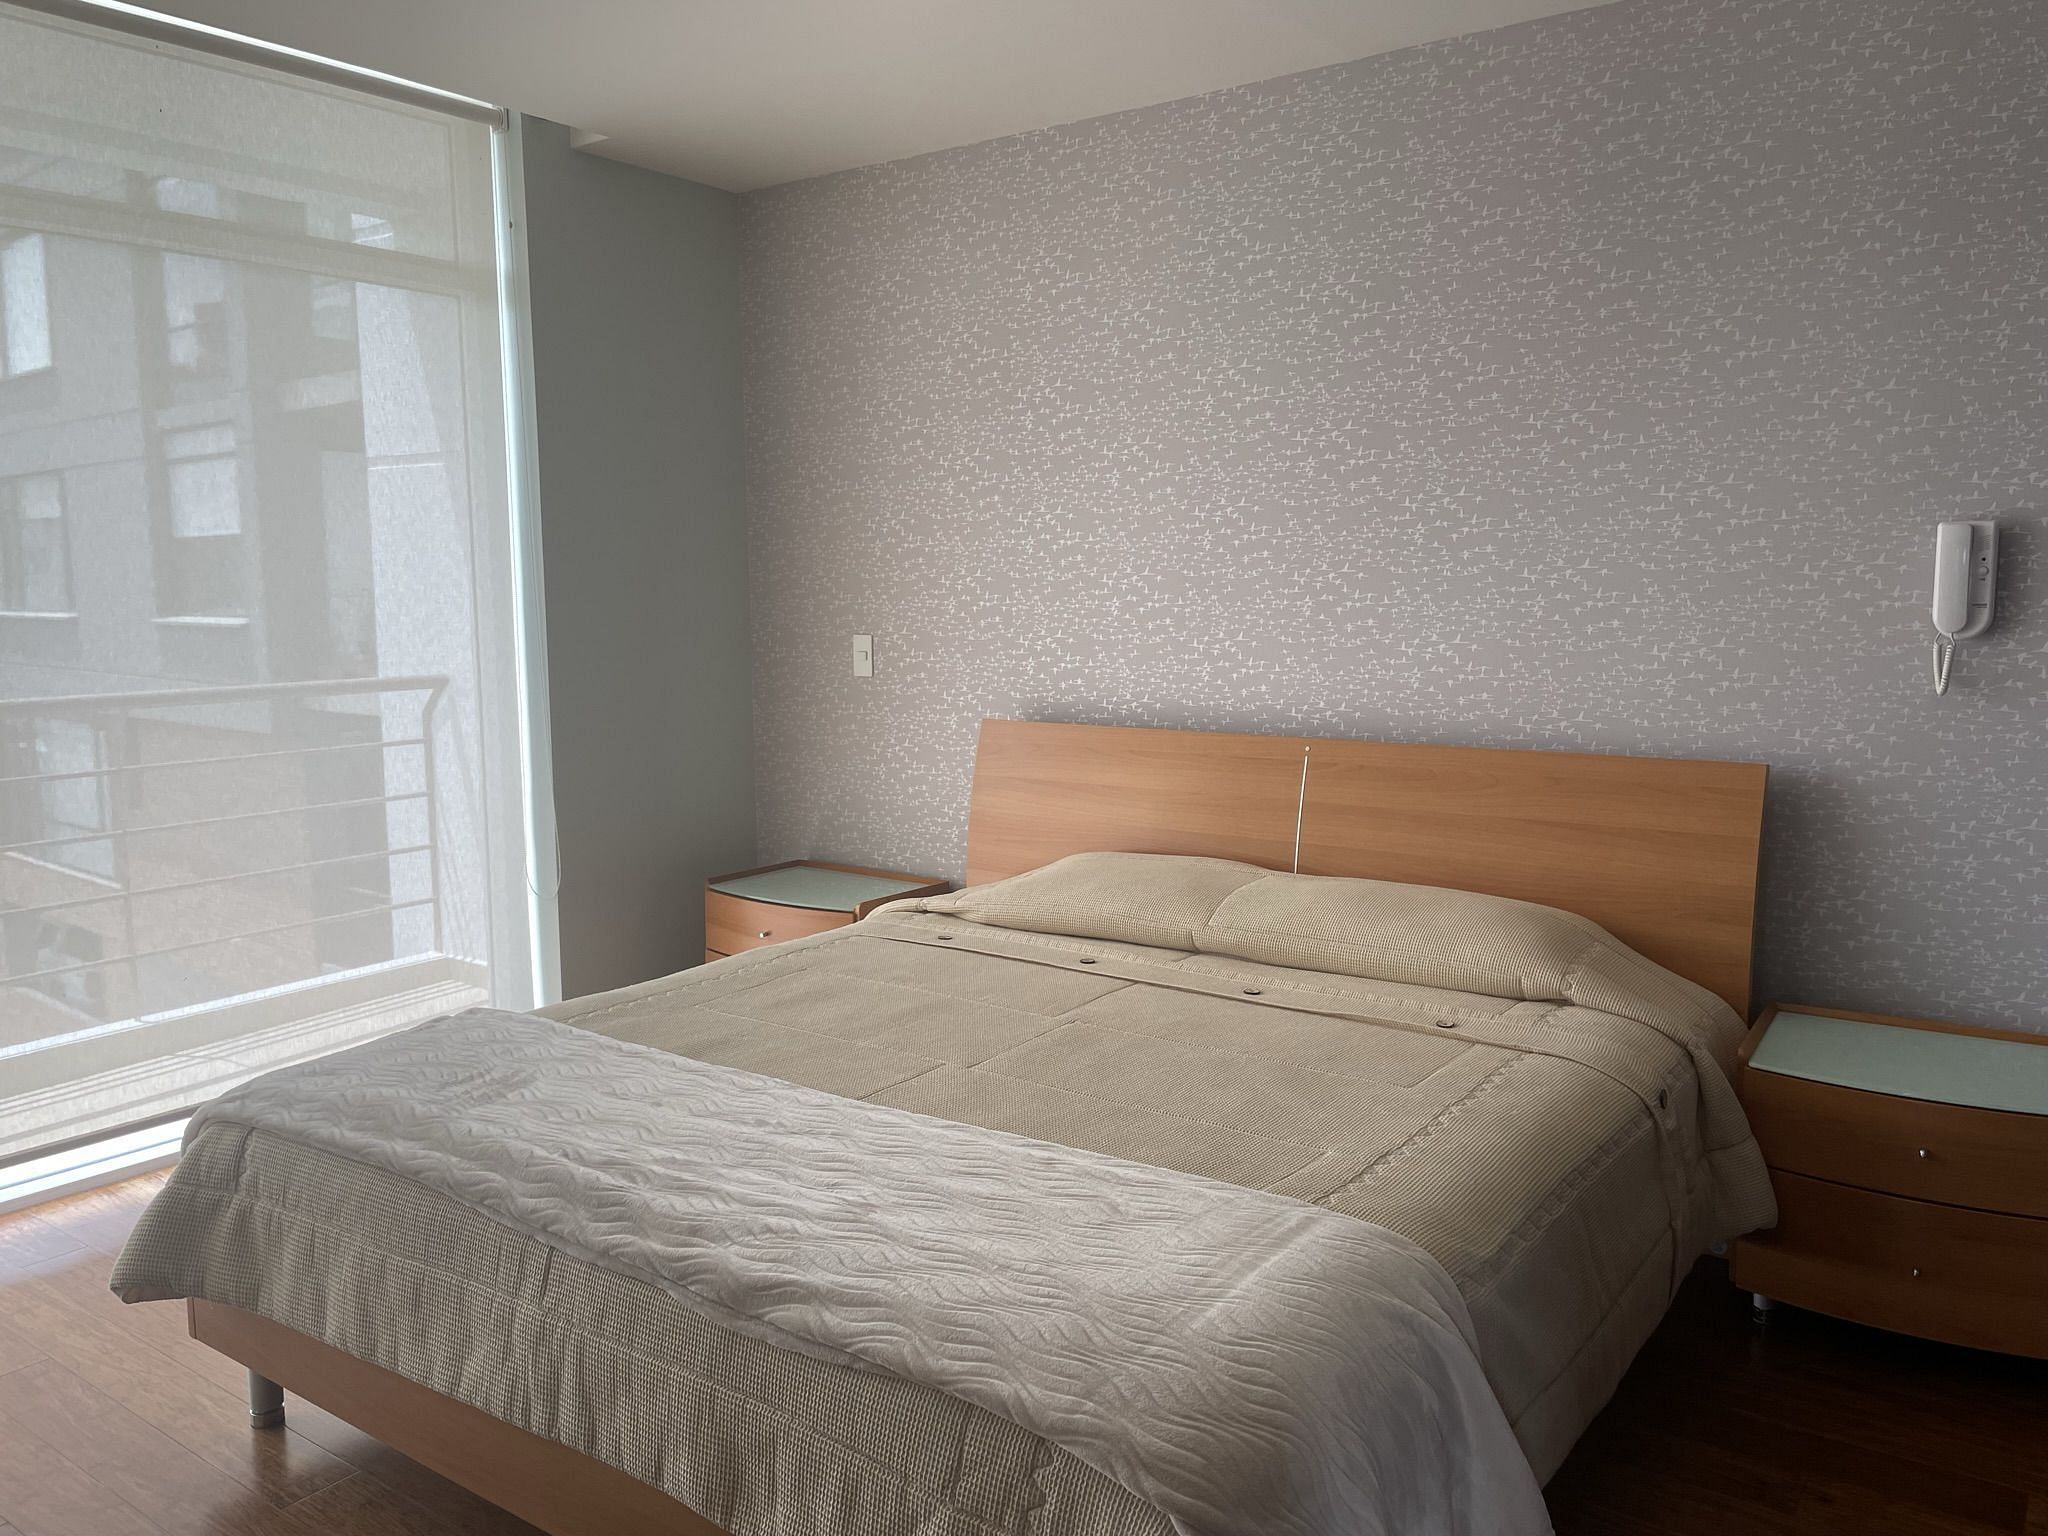 JWguest Apartment at Quito, Pichincha | Comfortable and complete department in Quito | Jwbnb no brobnb 8